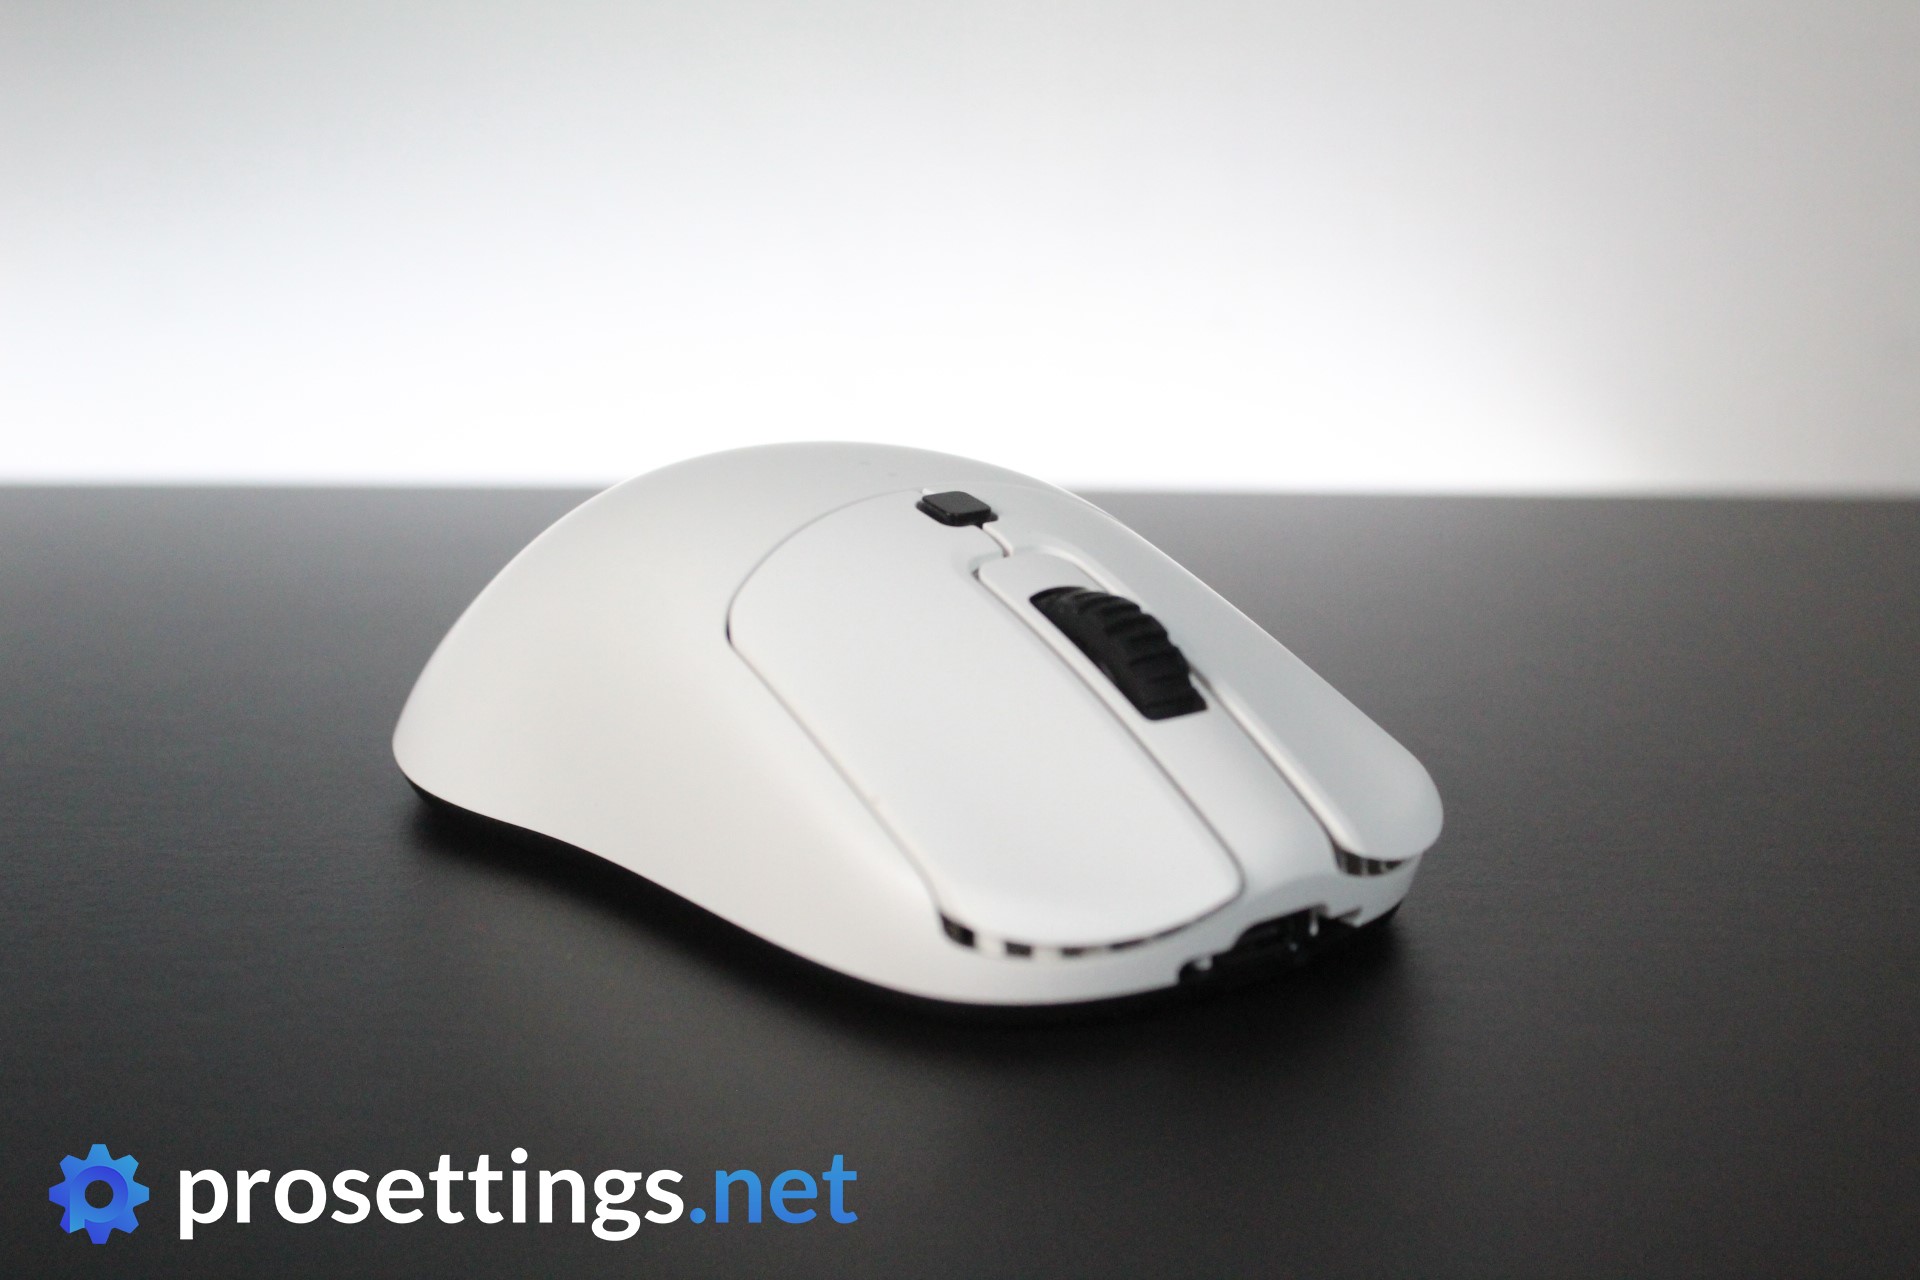 VAXEE XE Wireless Review